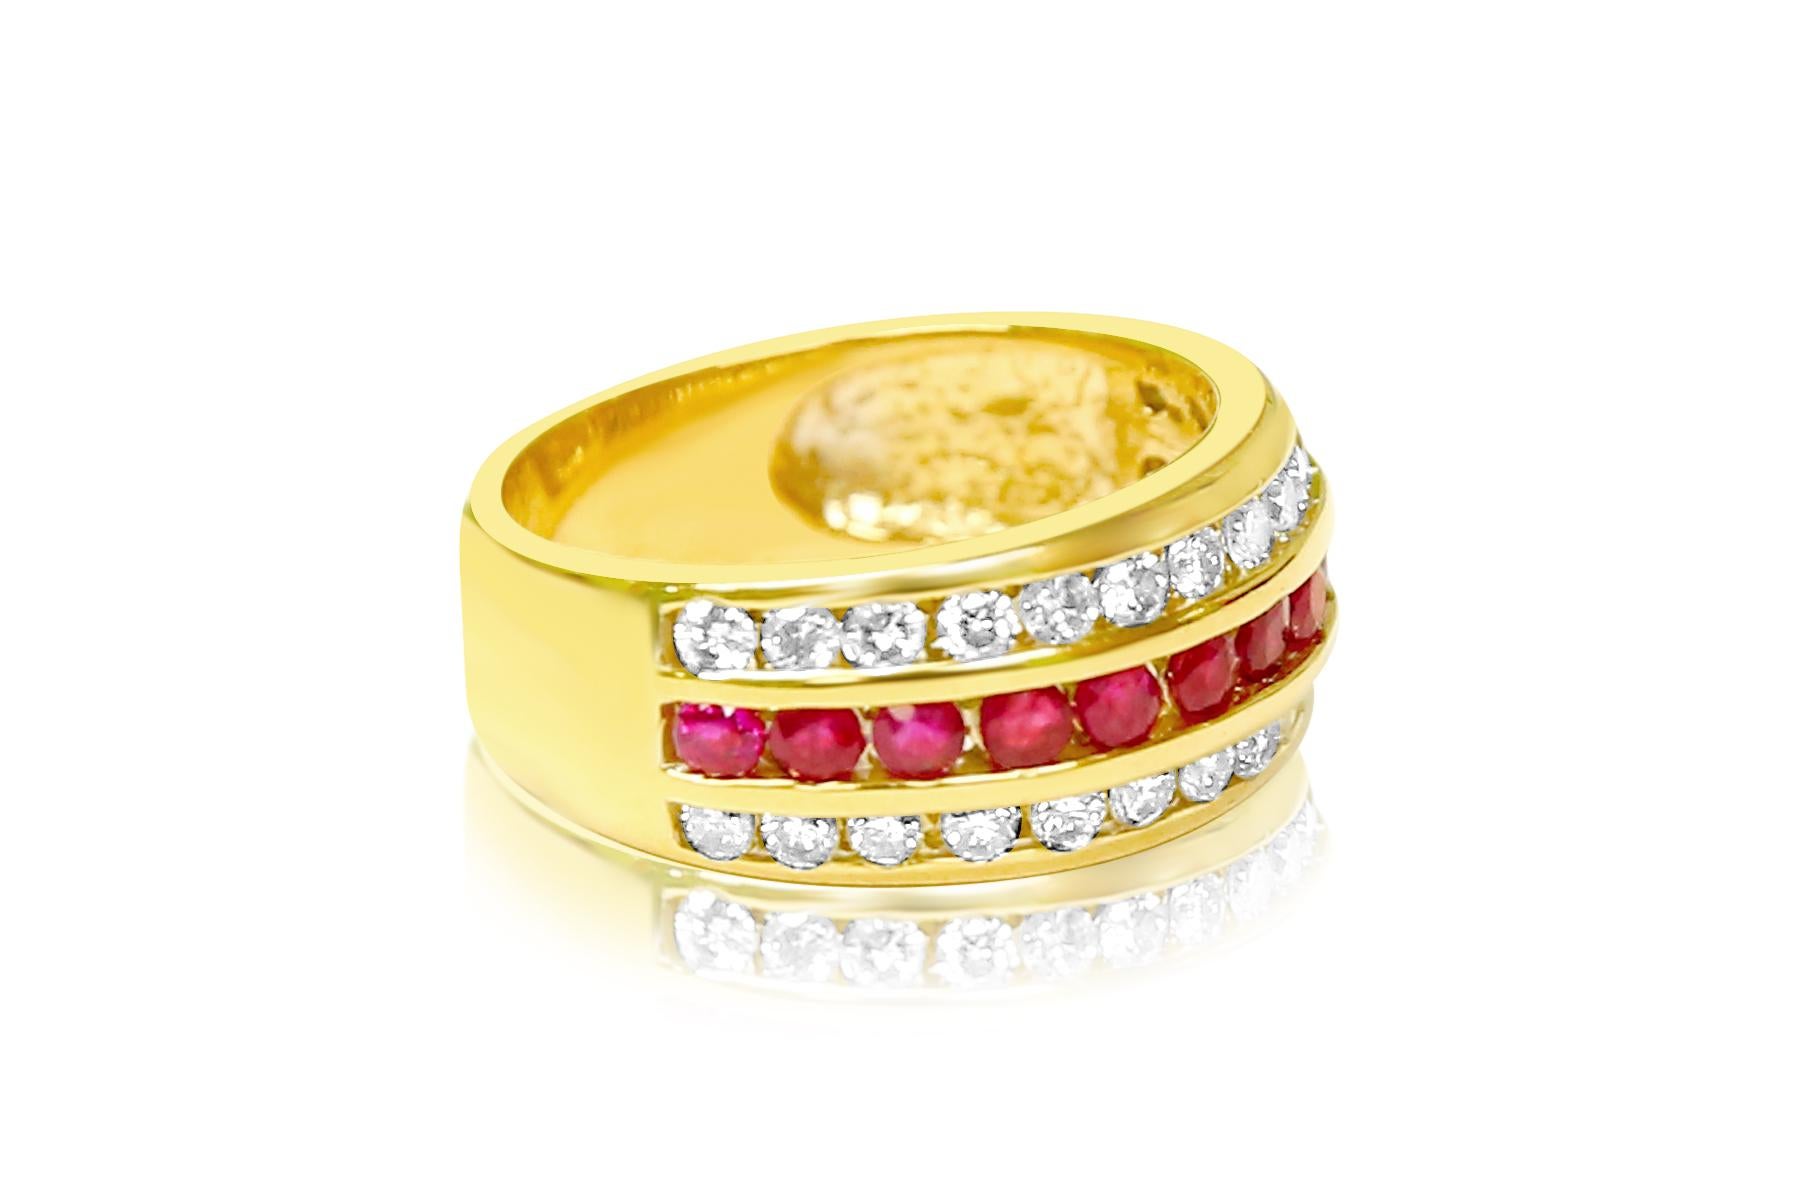 14k Yellow Gold, 2.25ct Diamond and Burma Ruby Ring. A pretty ring made of 14K yellow gold with sparkling diamonds totaling 1.25 carats. The diamonds are round and shiny, with VS clarity and a G color grade. The ring also features a Burma Ruby with